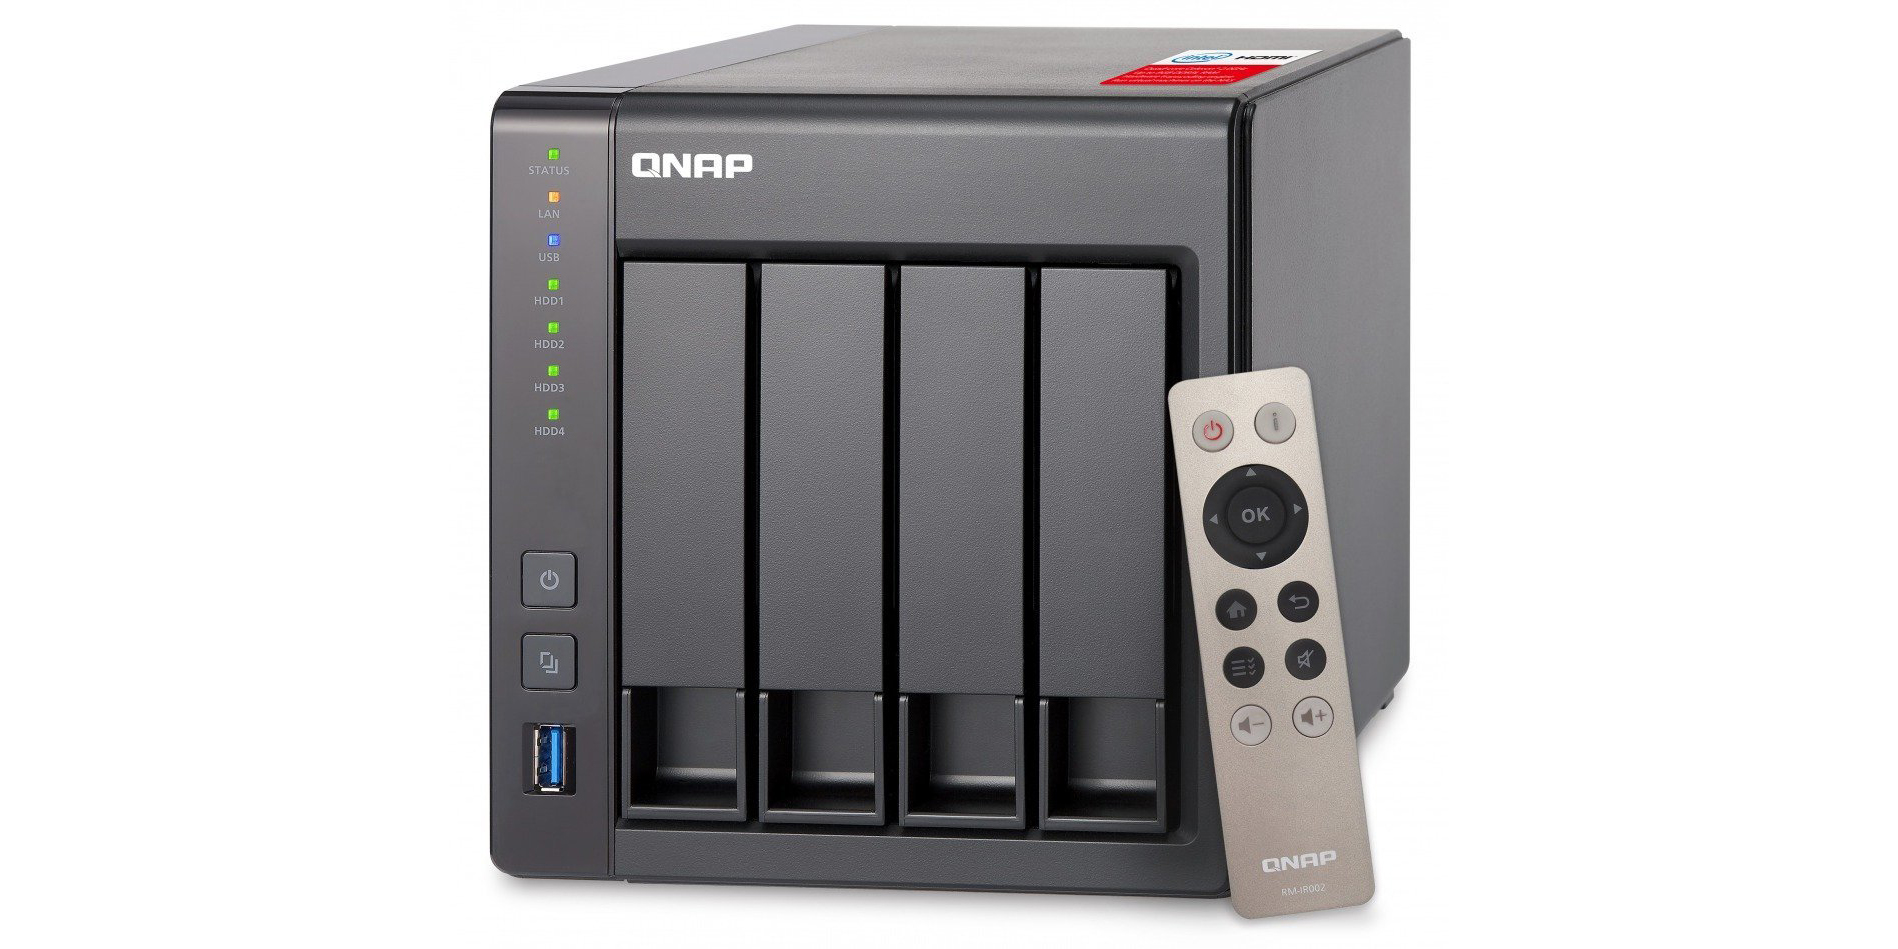 QNAP's NAS w/ + HDMI is now available for $400 at